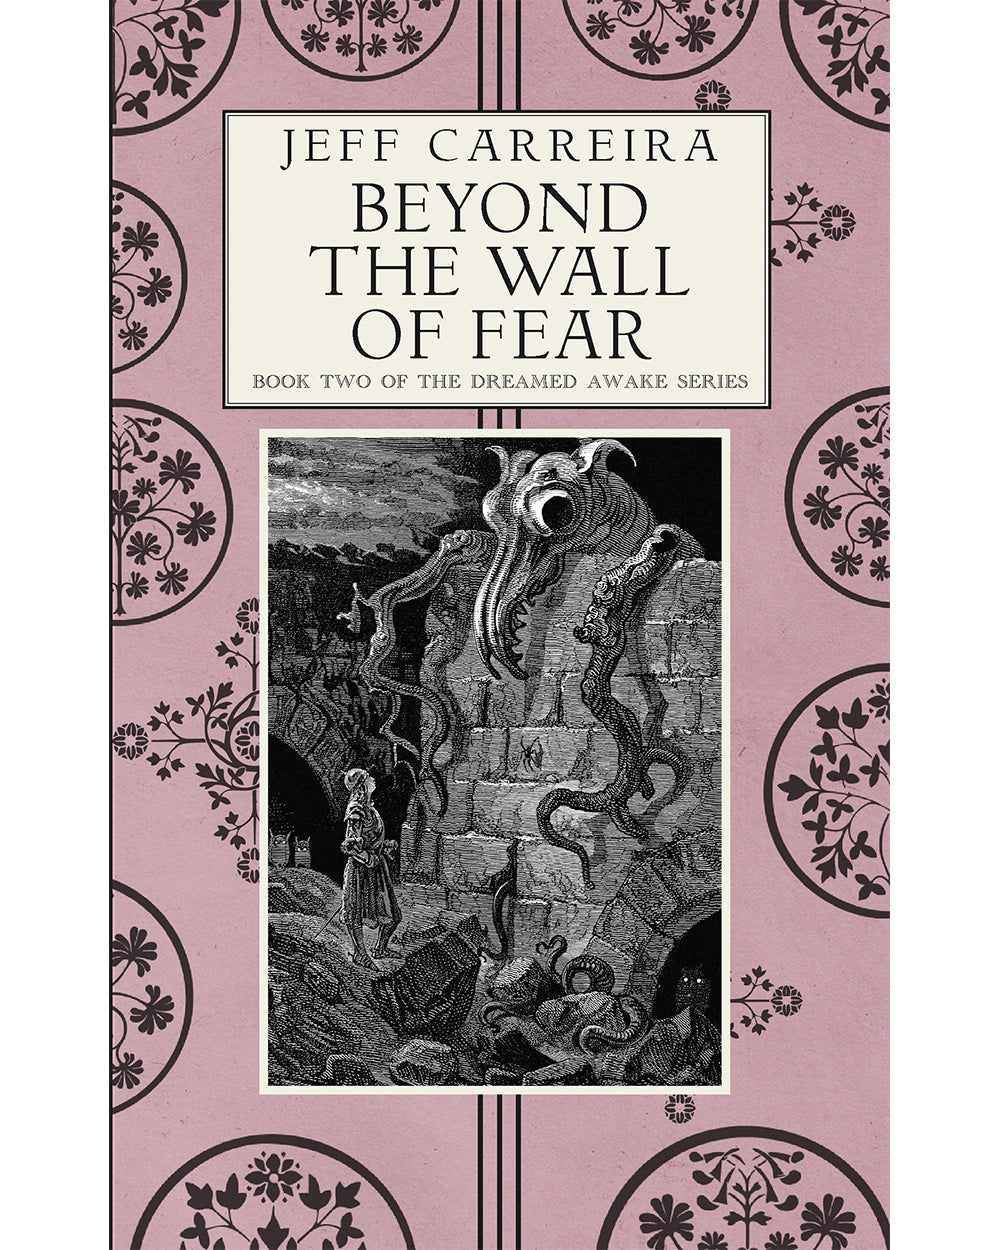 Beyond the Wall of Fear: A Novel